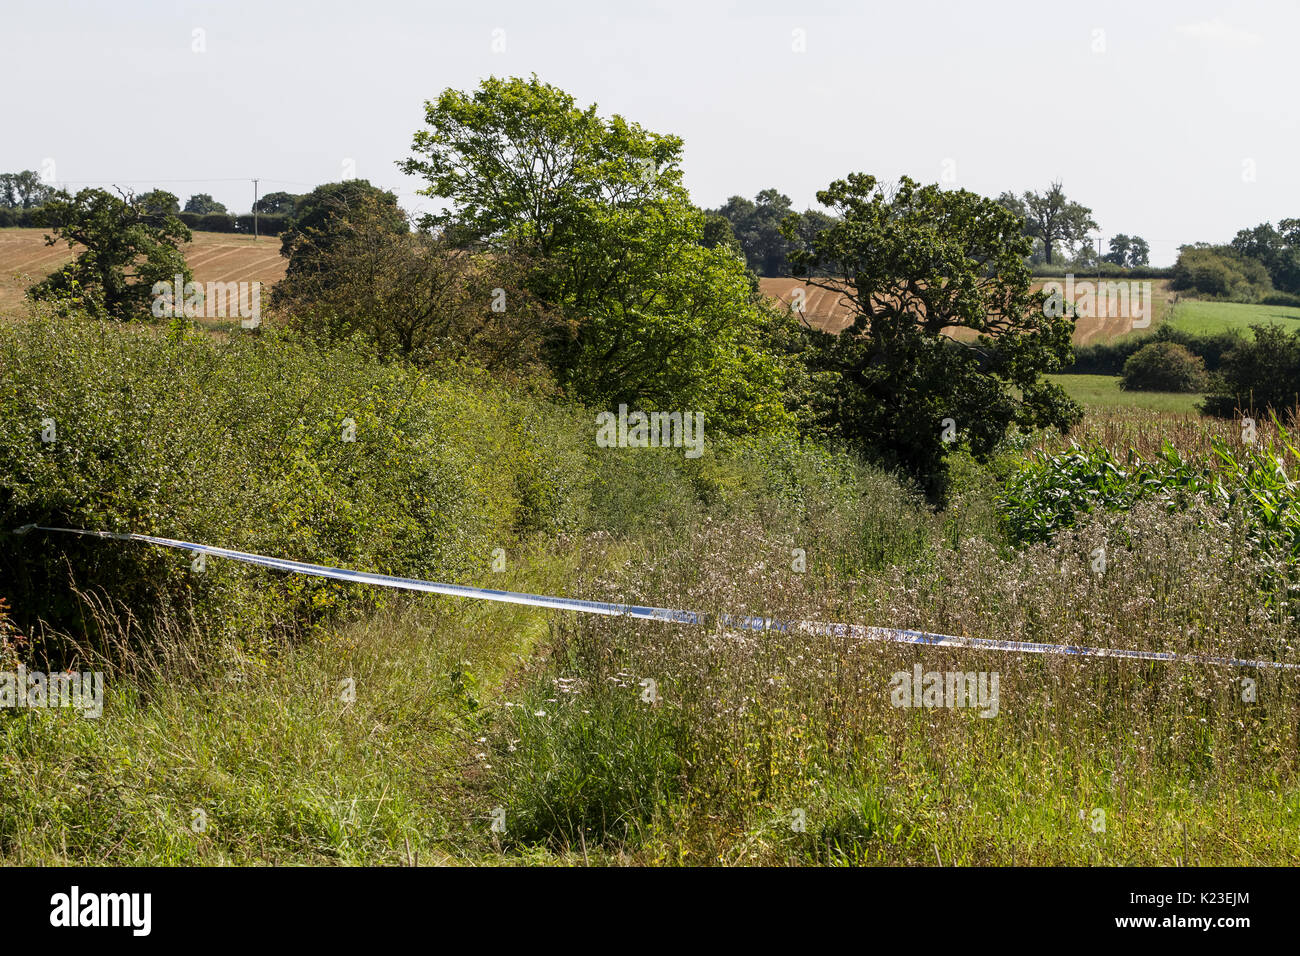 Blithfield Reservoir, Staffordshire, UK. 28th Aug, 2017. Police tape creates a cordon around the aftermath of a light aircraft plane crash in the small village of Abbots Bromley. An aircraft with one person on board crashed into a corn field and the causalty was air-lifted to Royal Stoke hospital for treatment. Blithfield Reservoir, Abbots Bromley, Staffordshire, UK. 28th August 2017. Credit: Richard Holmes/Alamy Live News Stock Photo